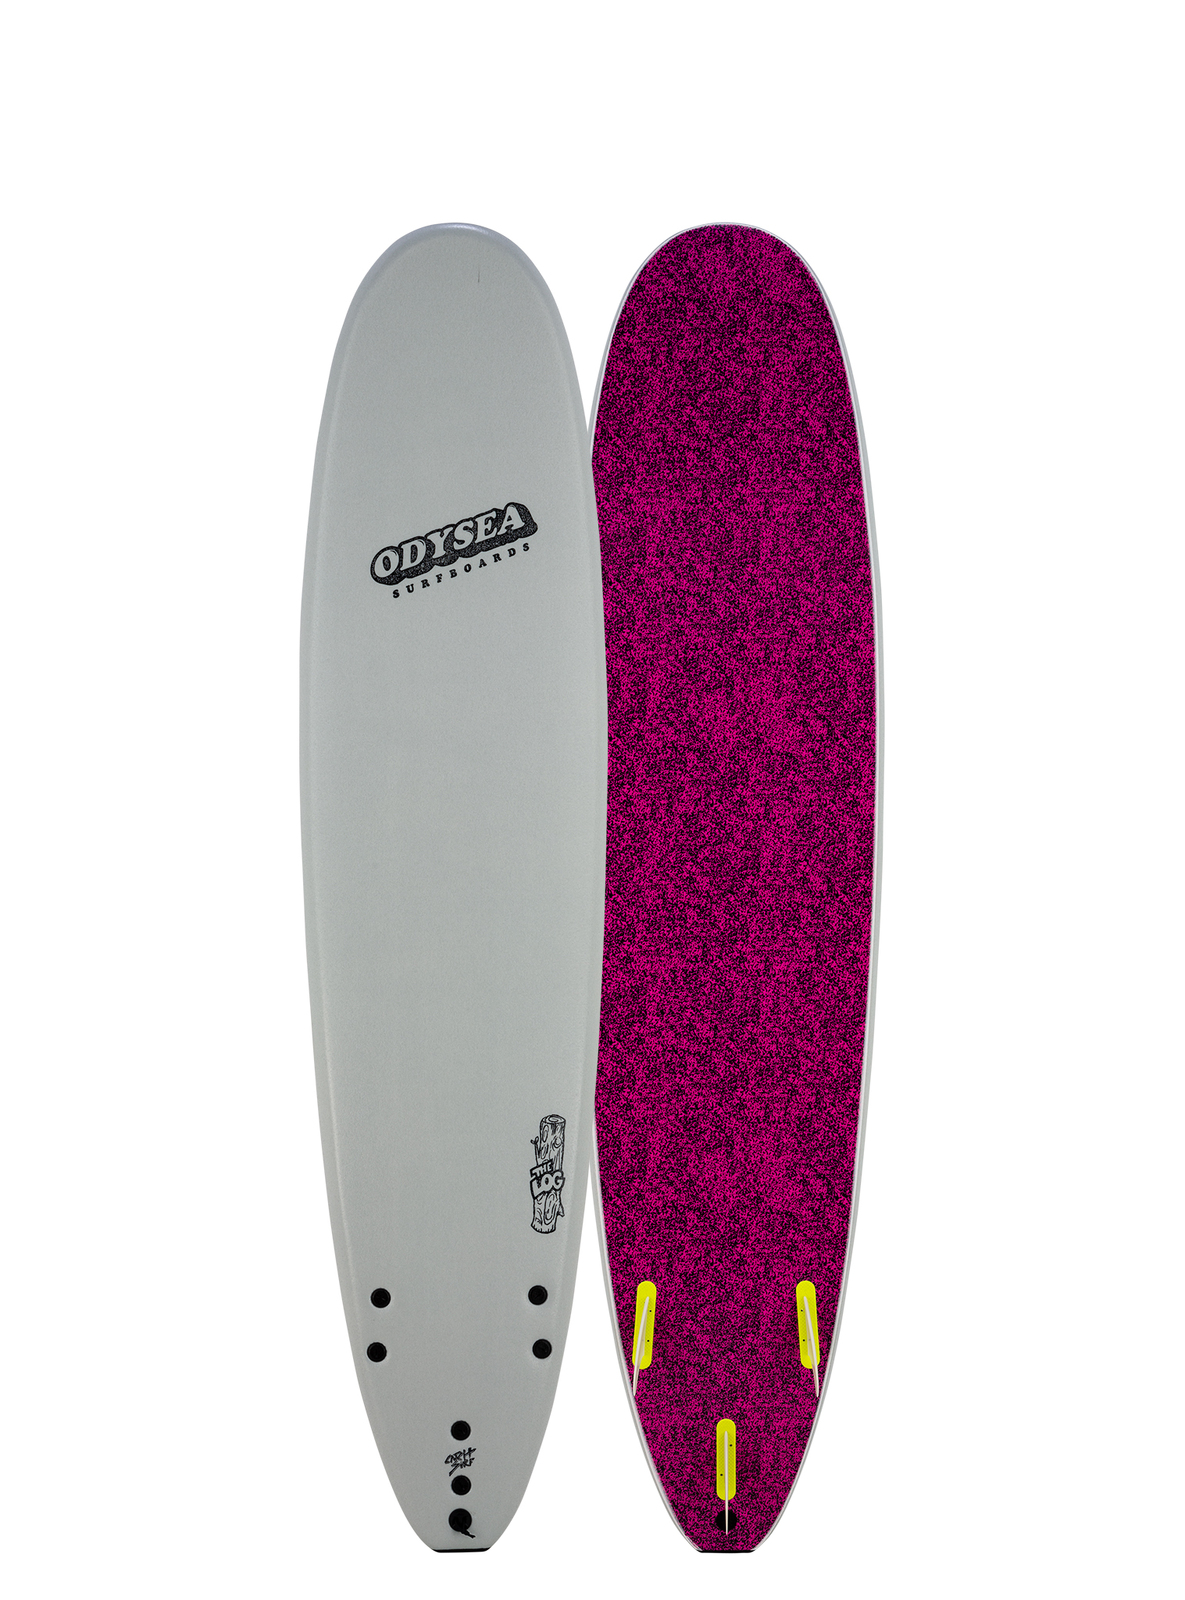 Catch Surf Log 8'0 Tri Fin. This surfboard is suitable for